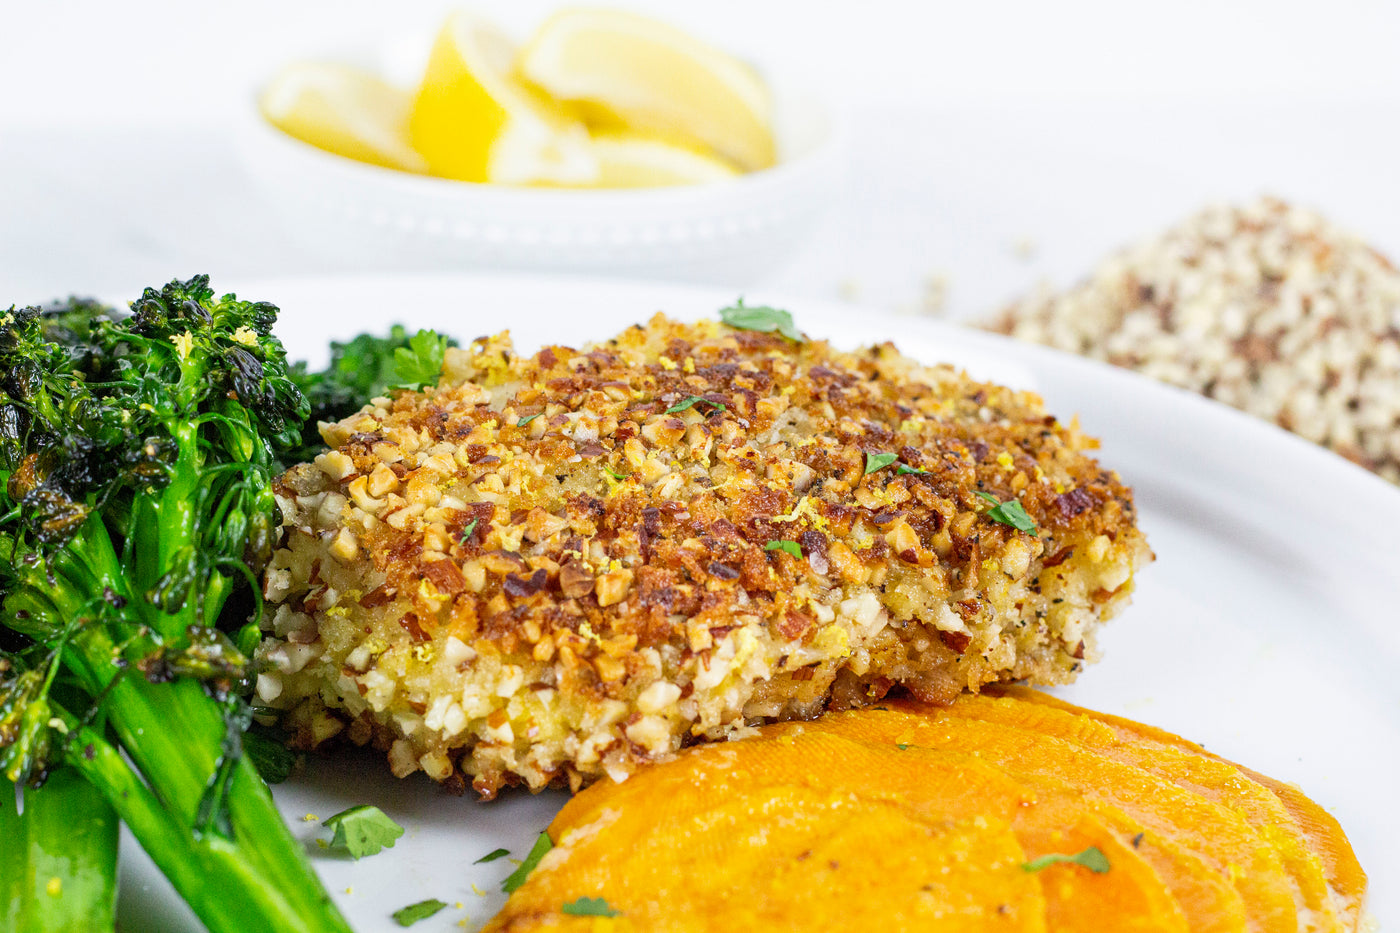 Diced Almond Crusted White Fish